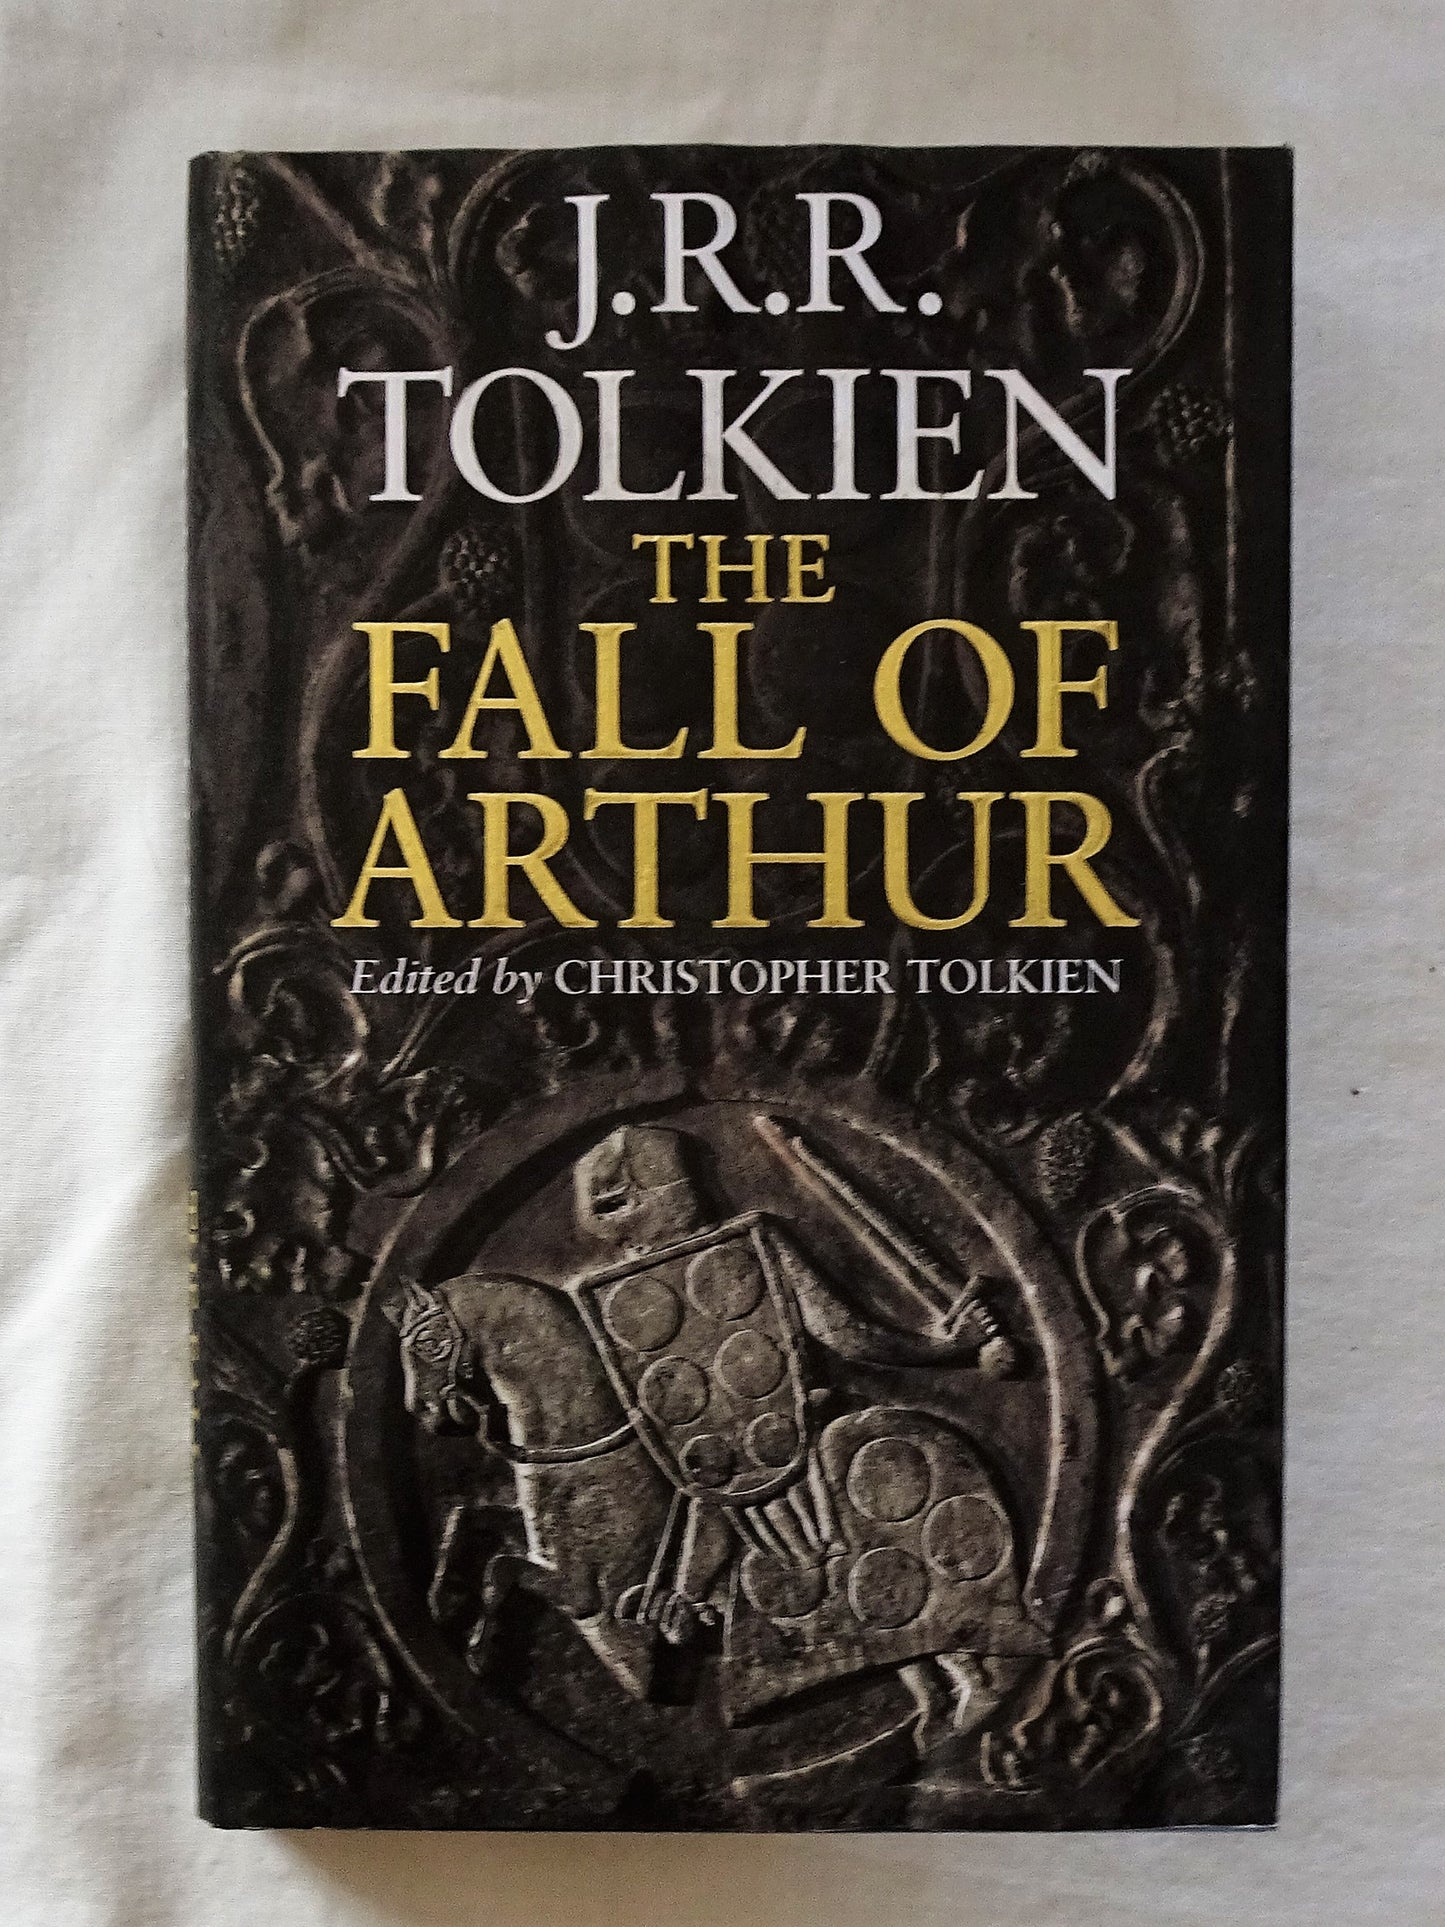 The Fall of Arthur by J. R. R. Tolkien